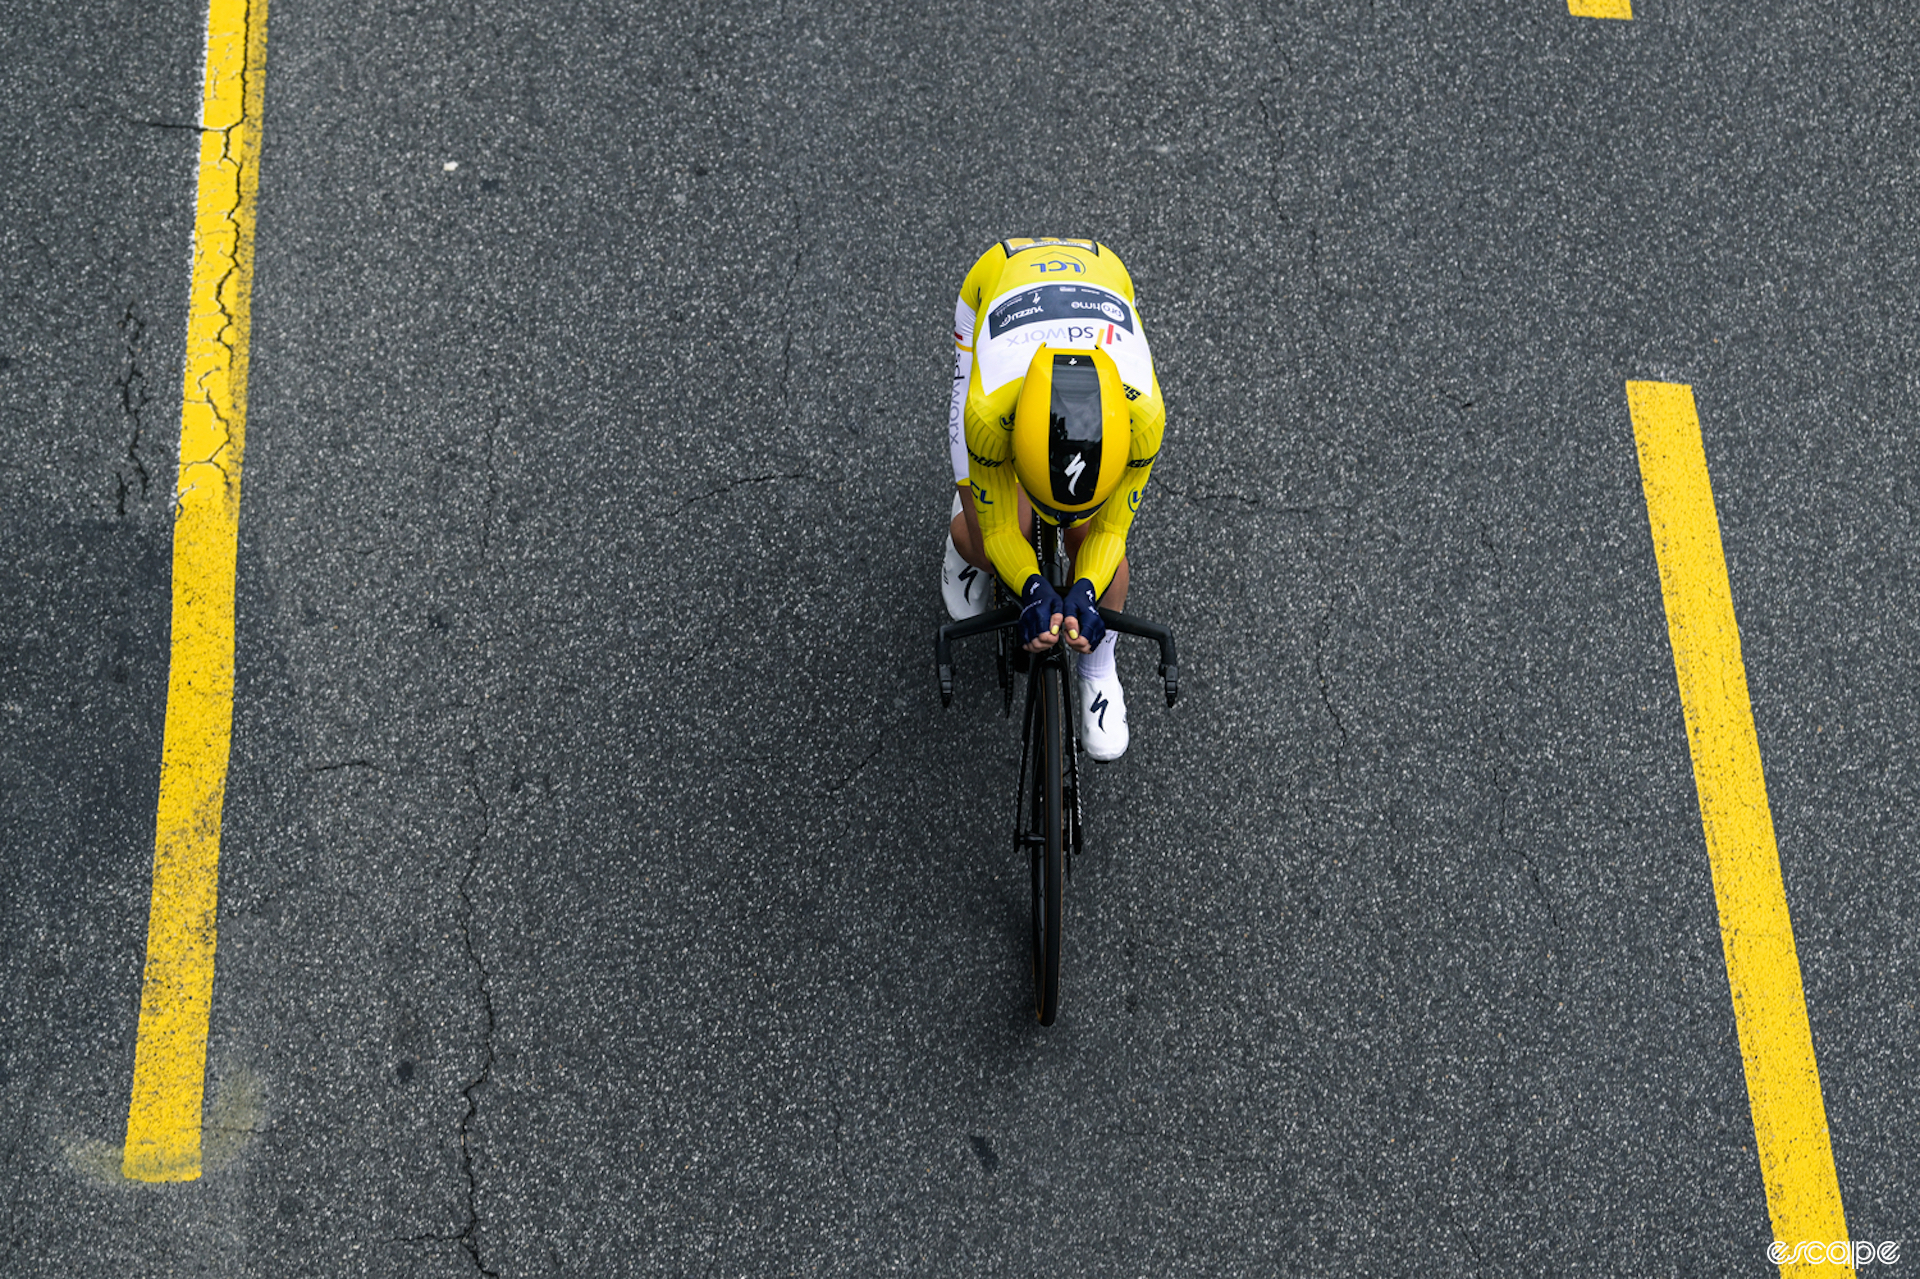 Demi Vollering rides the time trial at the Tour de France Femmes. The view is from above, looking down at her clad in the yellow skinsuit of overall leader.